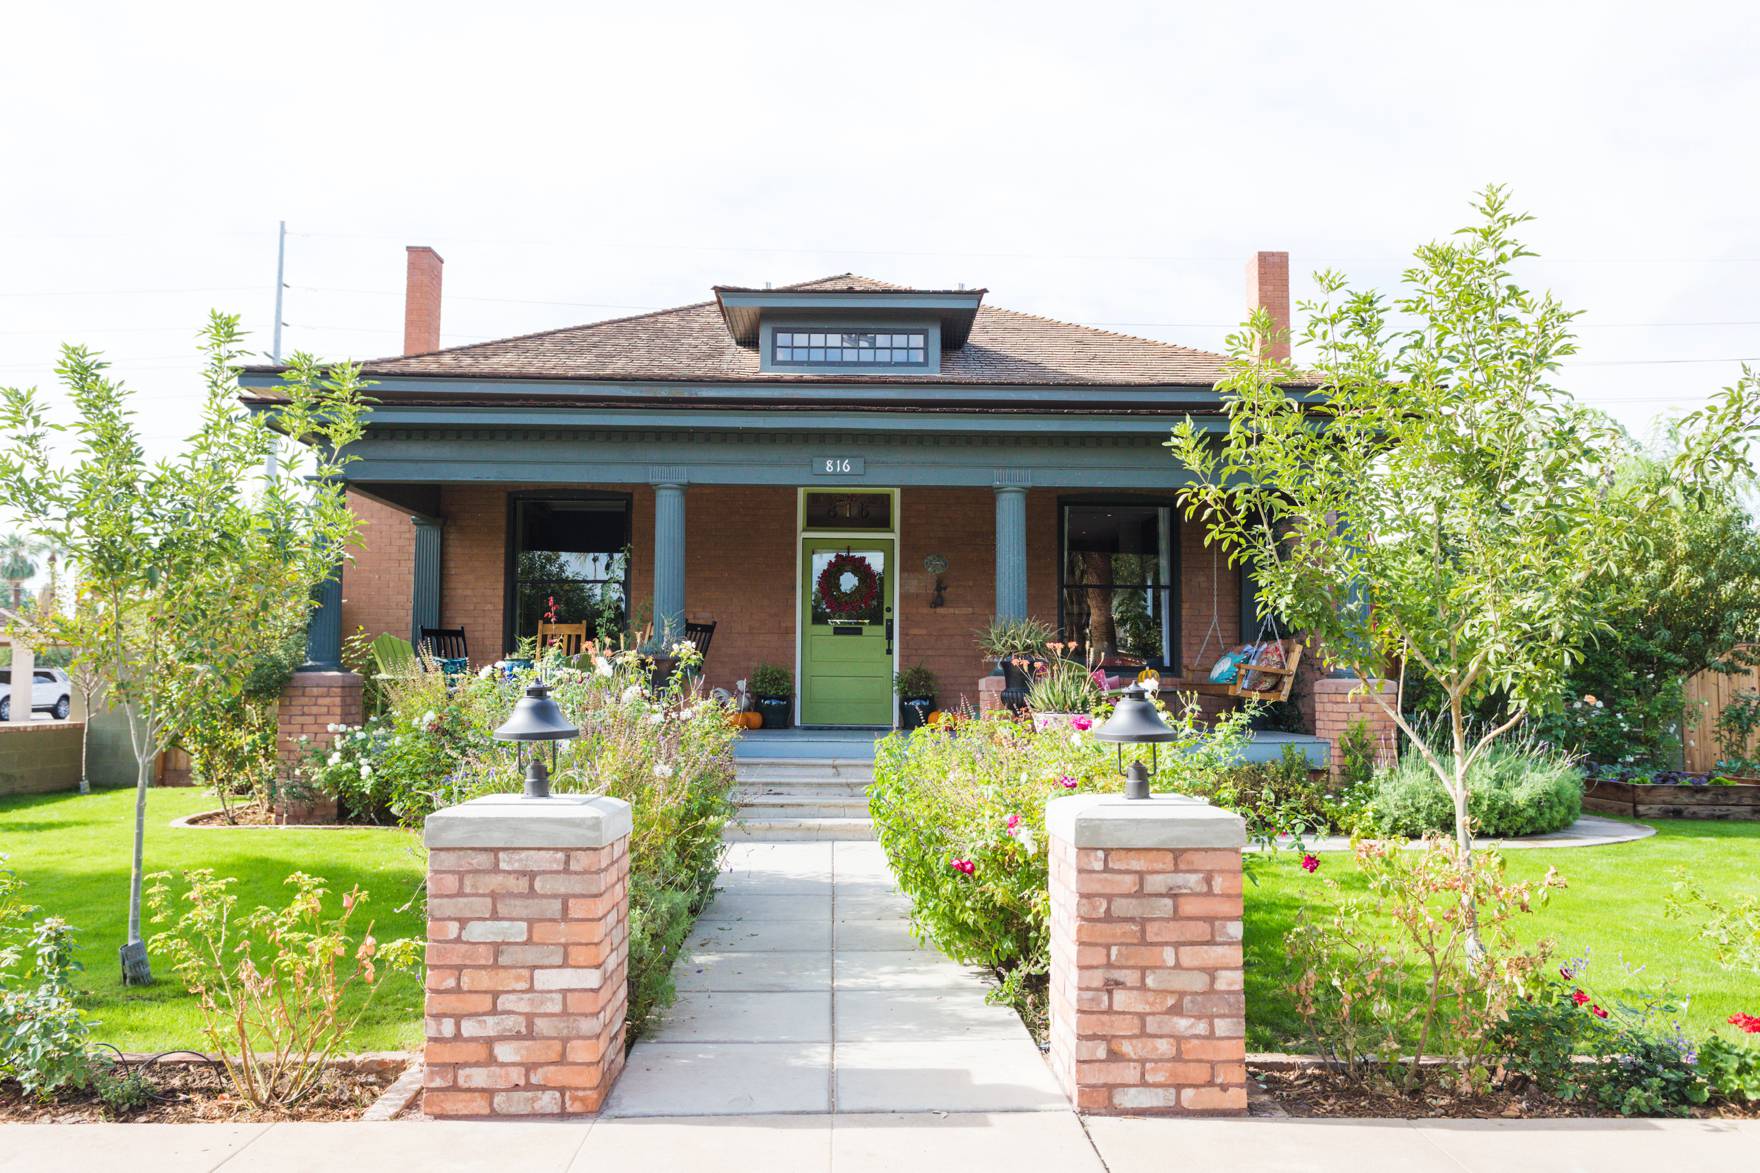 Home Tour of Boho Farm and Home in Downtown Phoenix - cottage brick style home from 1903